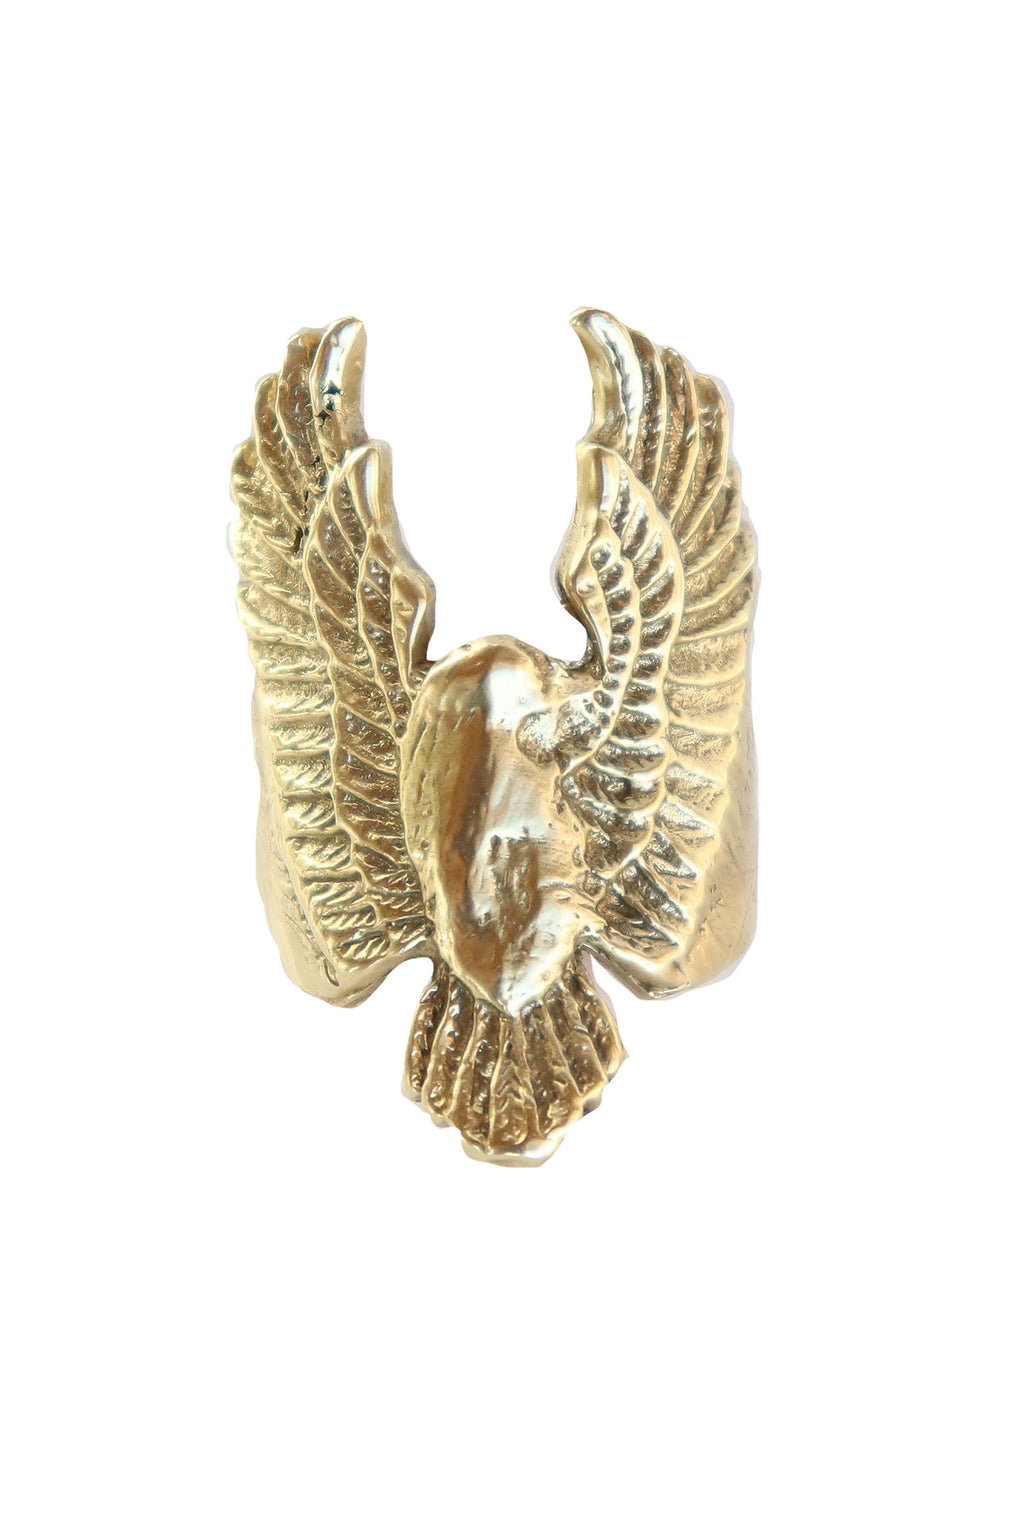 the Eagle ring